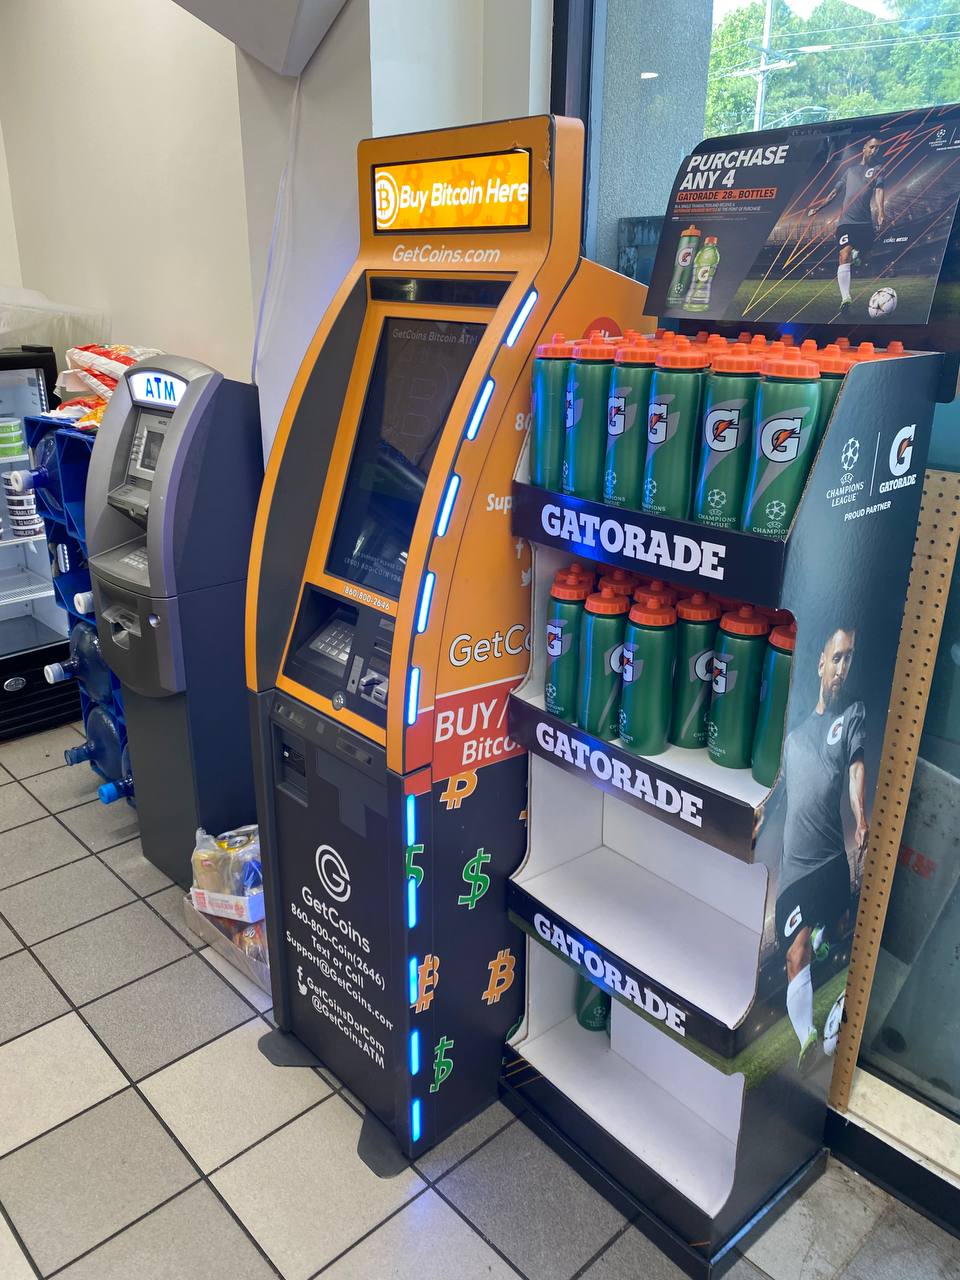 Getcoins - Bitcoin ATM - Inside of Exxon in Lake Shore, Maryland